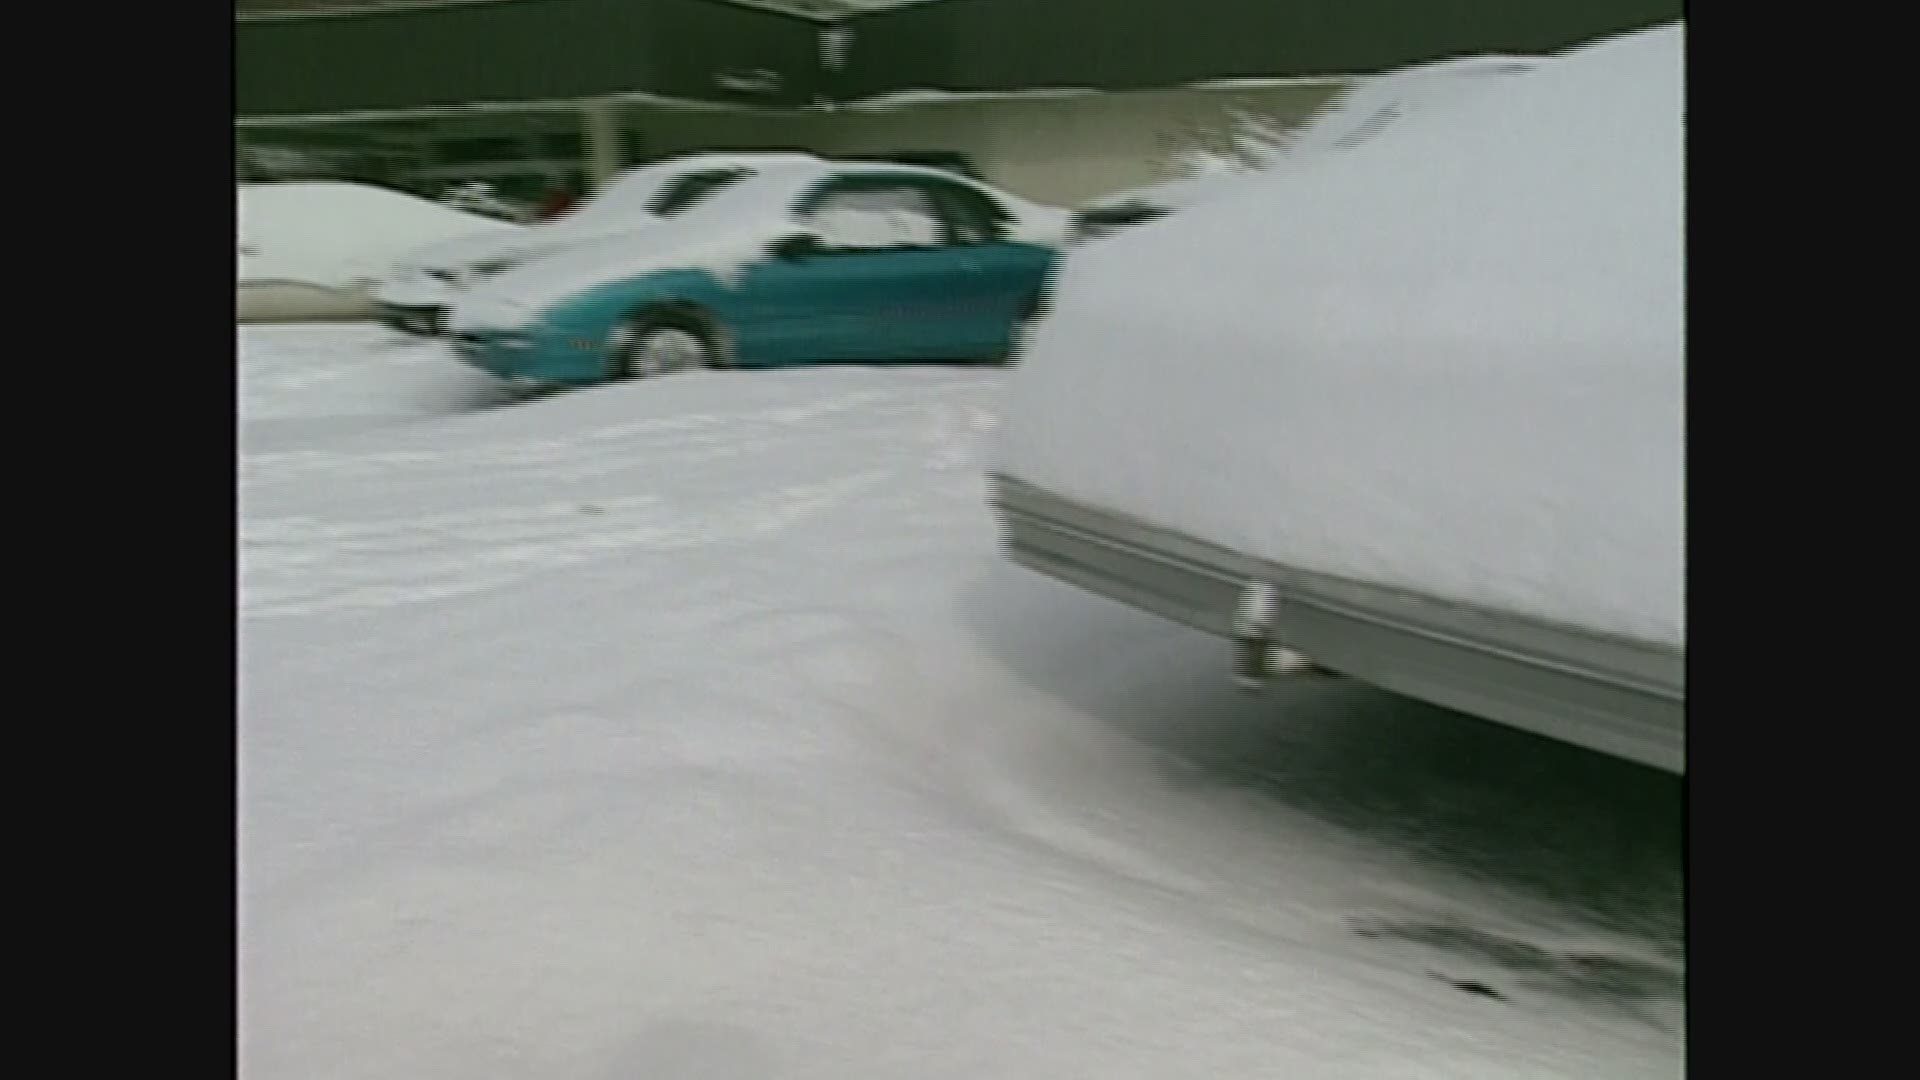 This is archive footage of the Blizzard of 1993 where hundreds of thousands of people were stuck in hotels overnight across East Tennessee.  This story is from March 14, 1993.